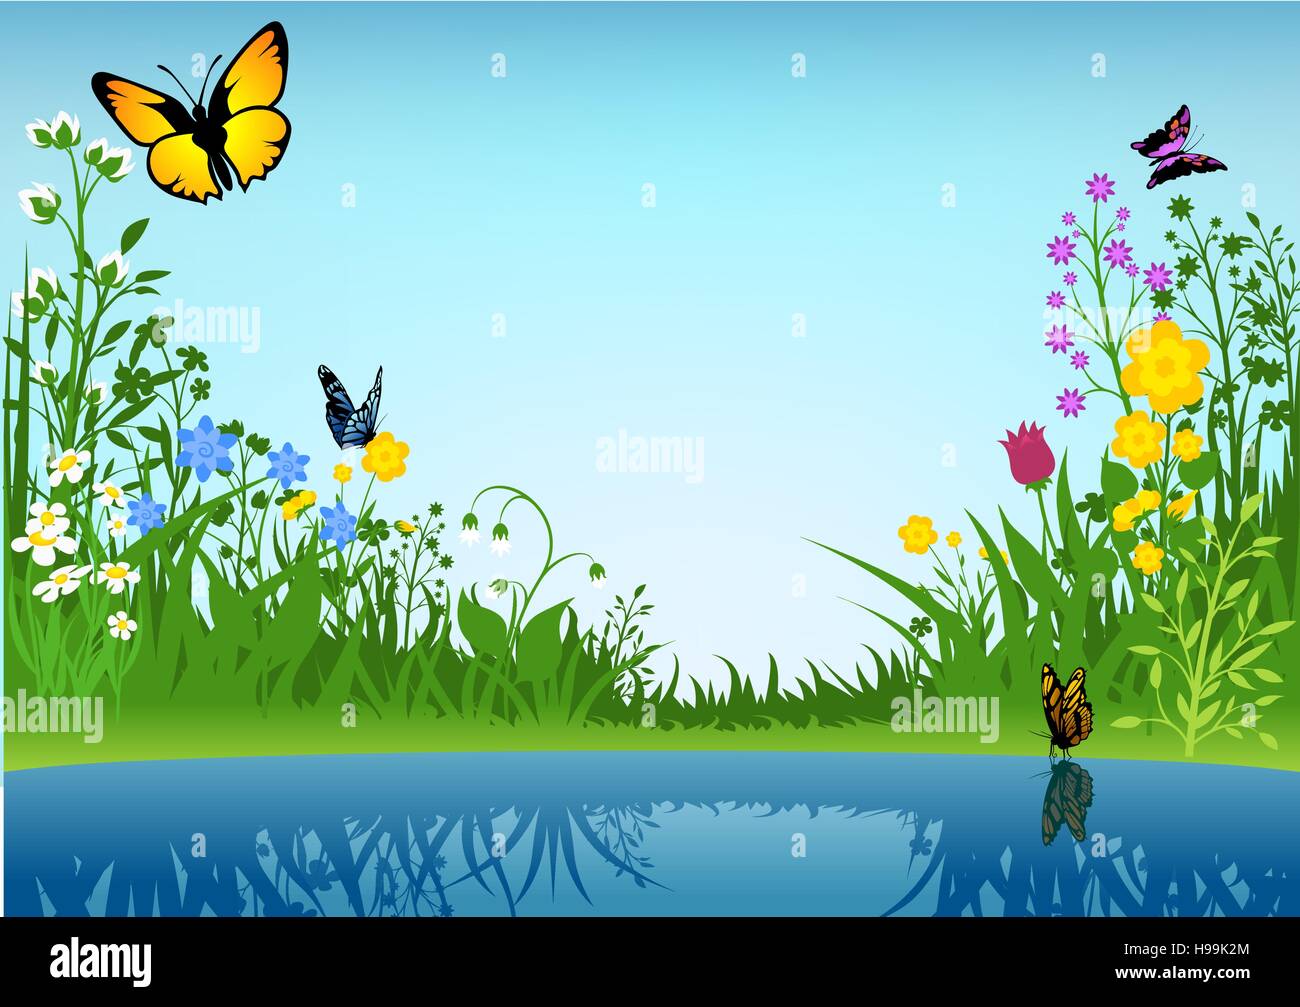 Pond And Butterflies Background Stock Vector